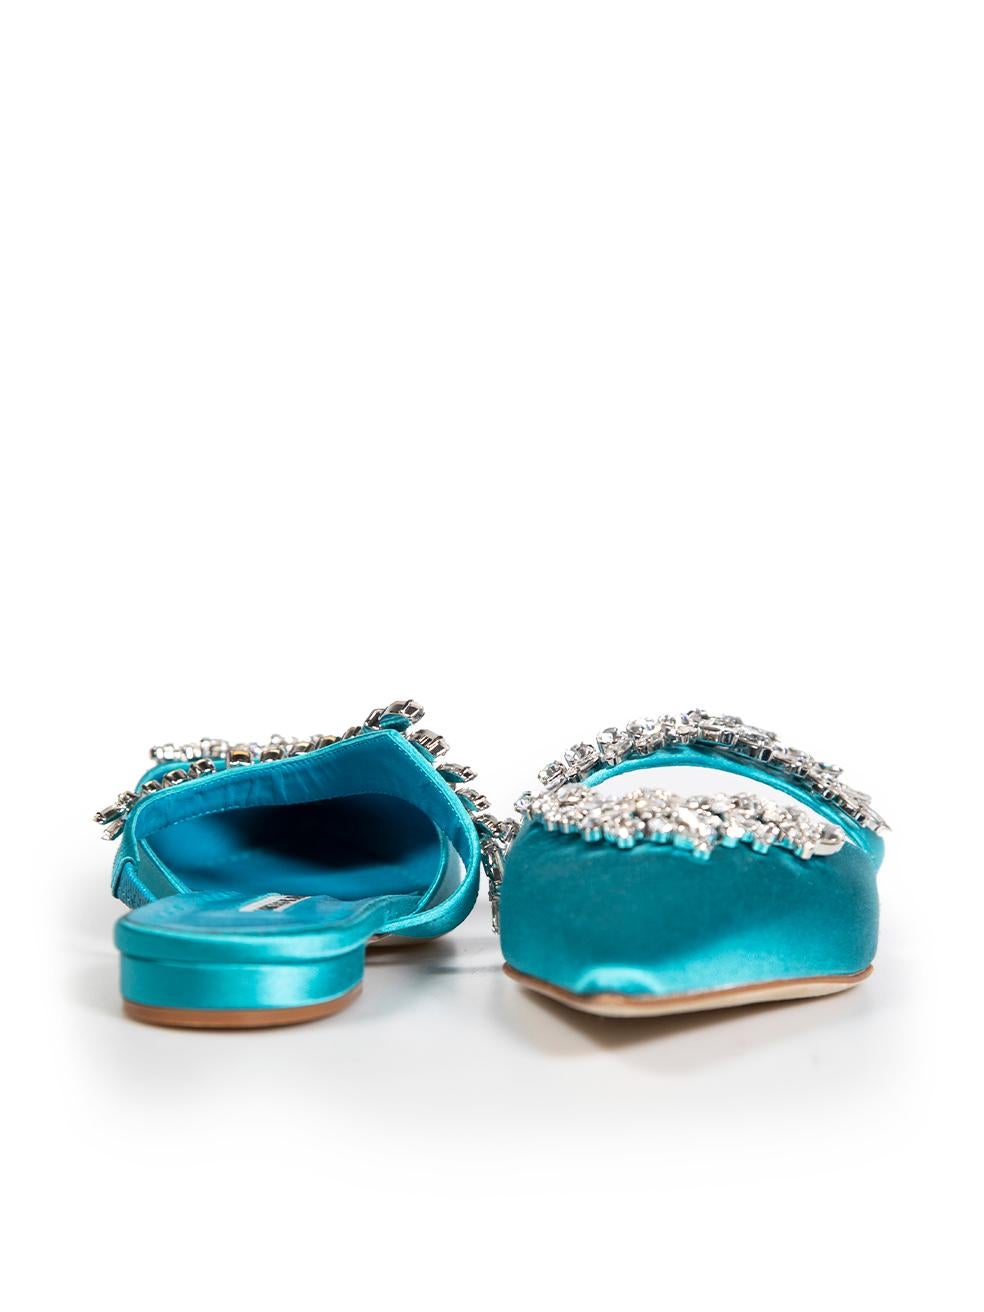 Manolo Blahnik Turquoise Embellished Lurum Mules Size IT 36.5 In Good Condition For Sale In London, GB